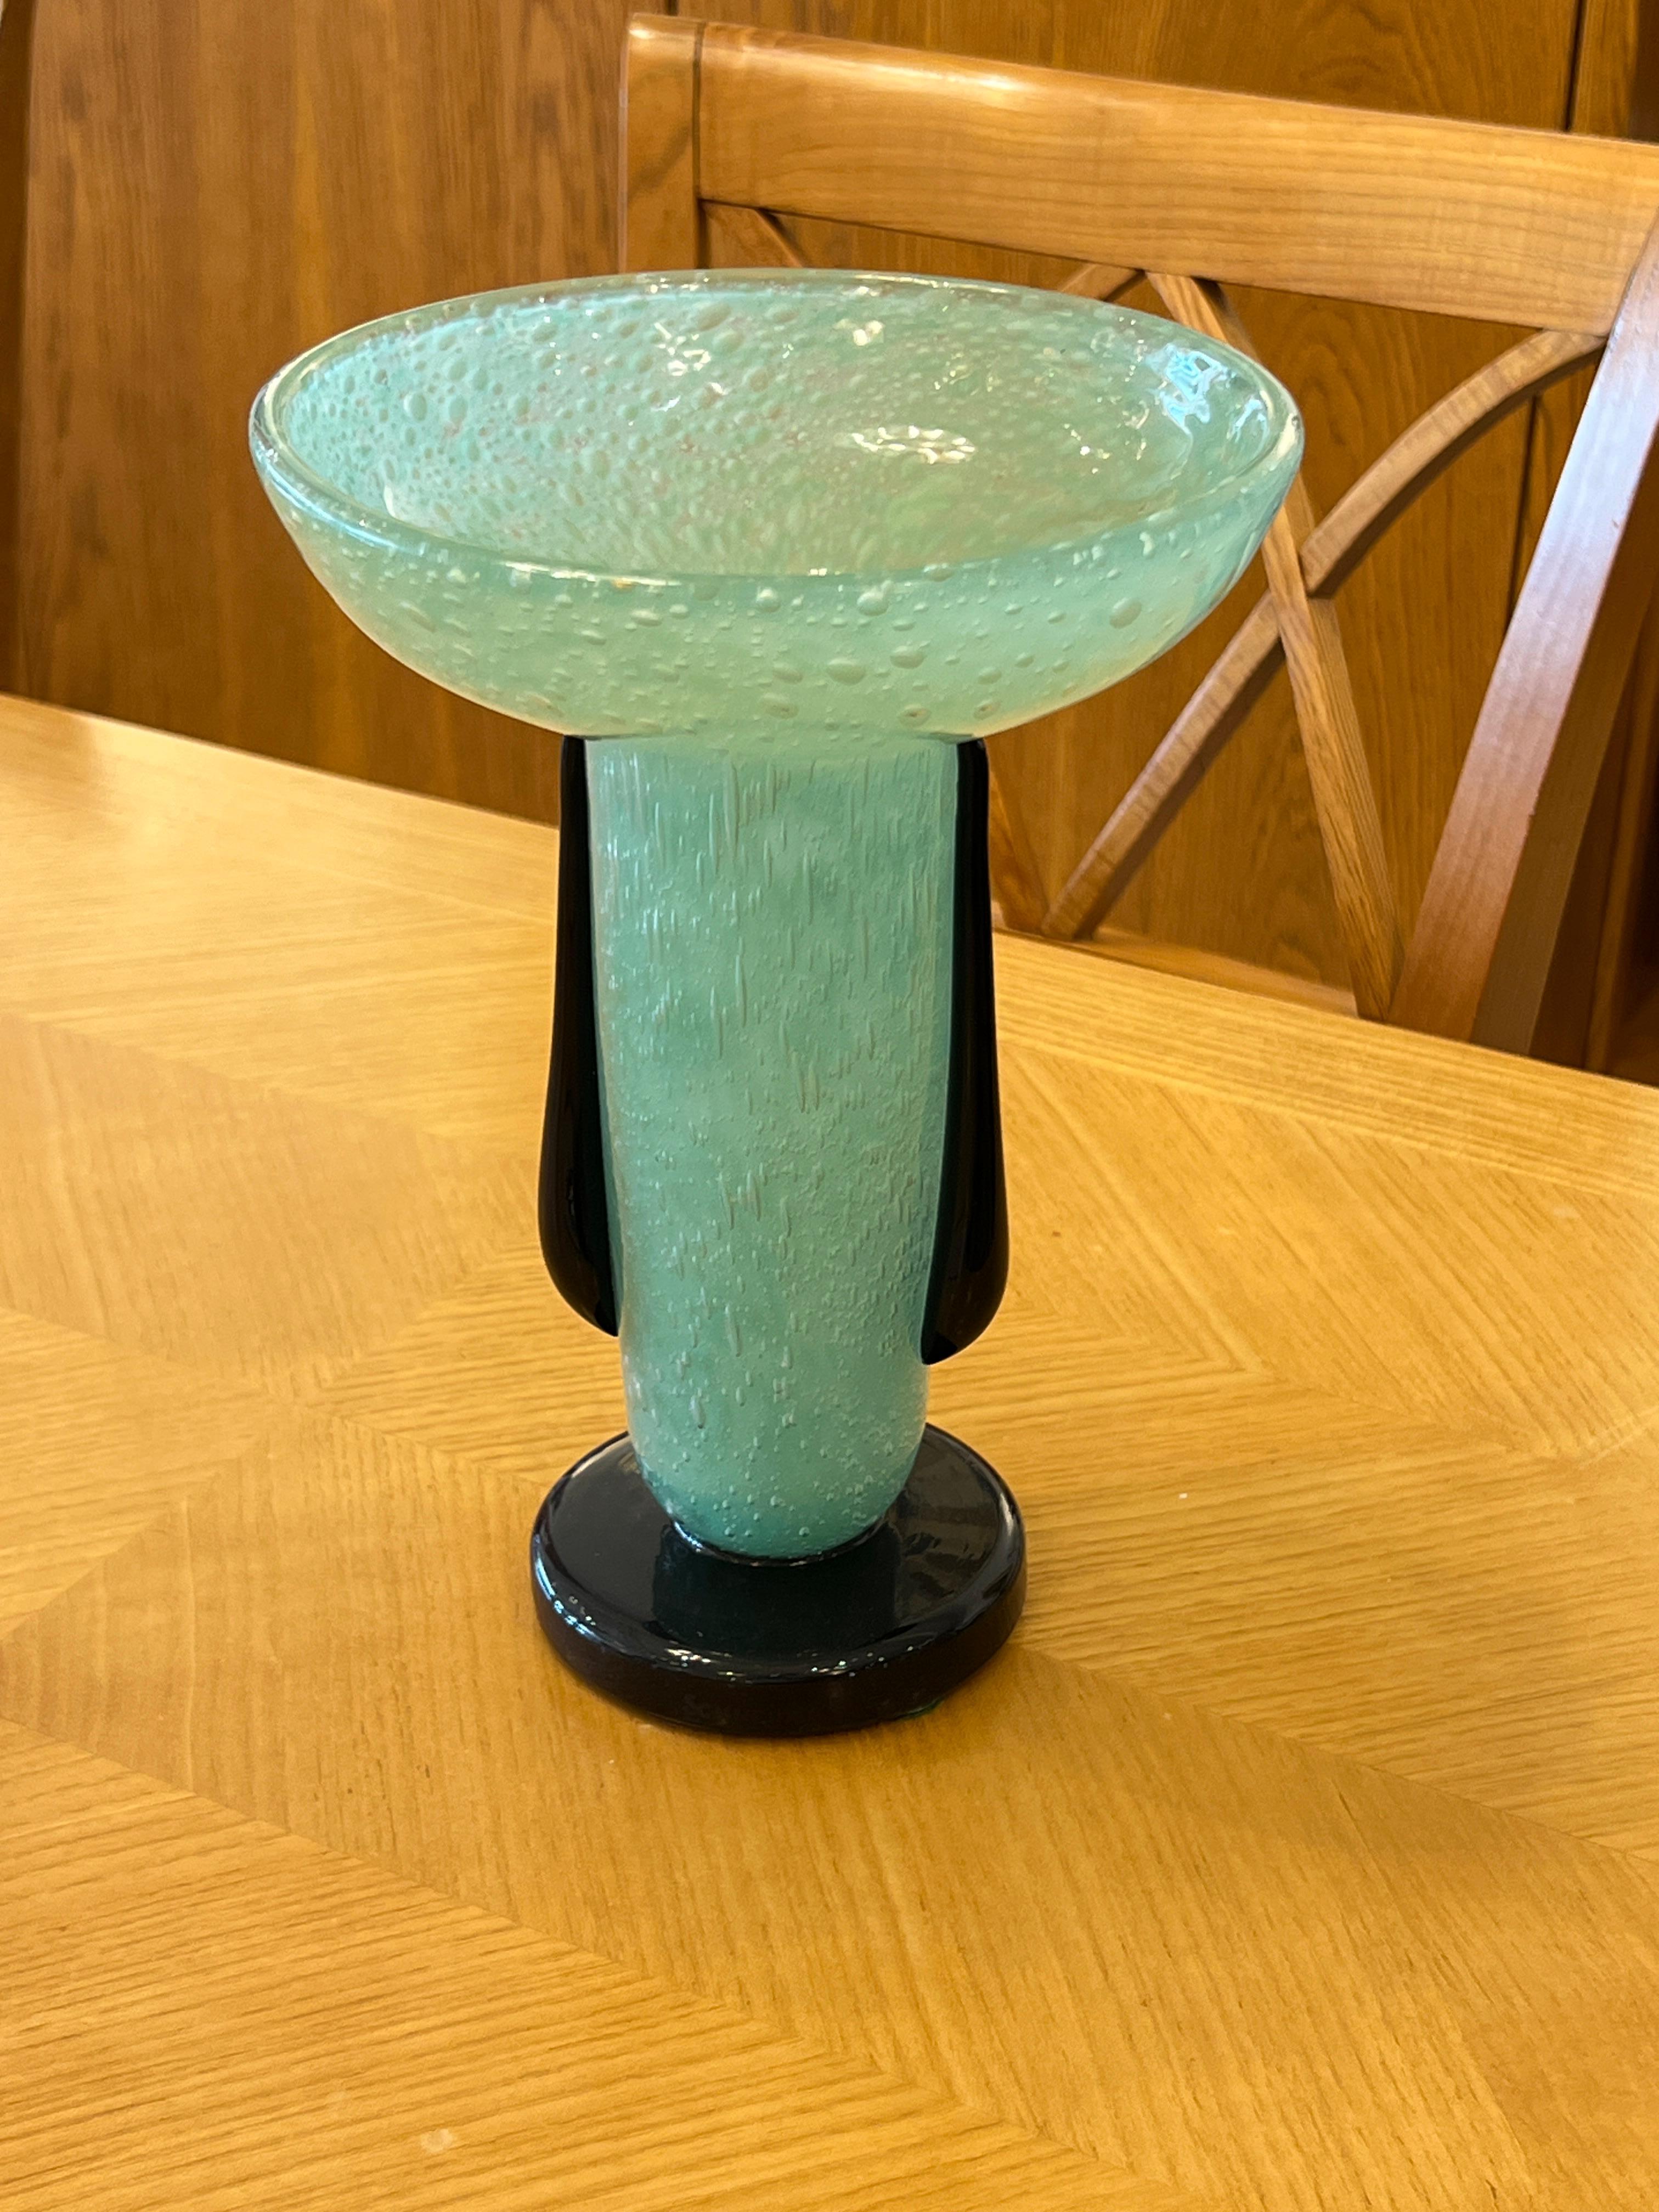 Art Deco glass vase by Charles Schneider in jade colored glass with black-tear like applications and base.

Signature: Schneider